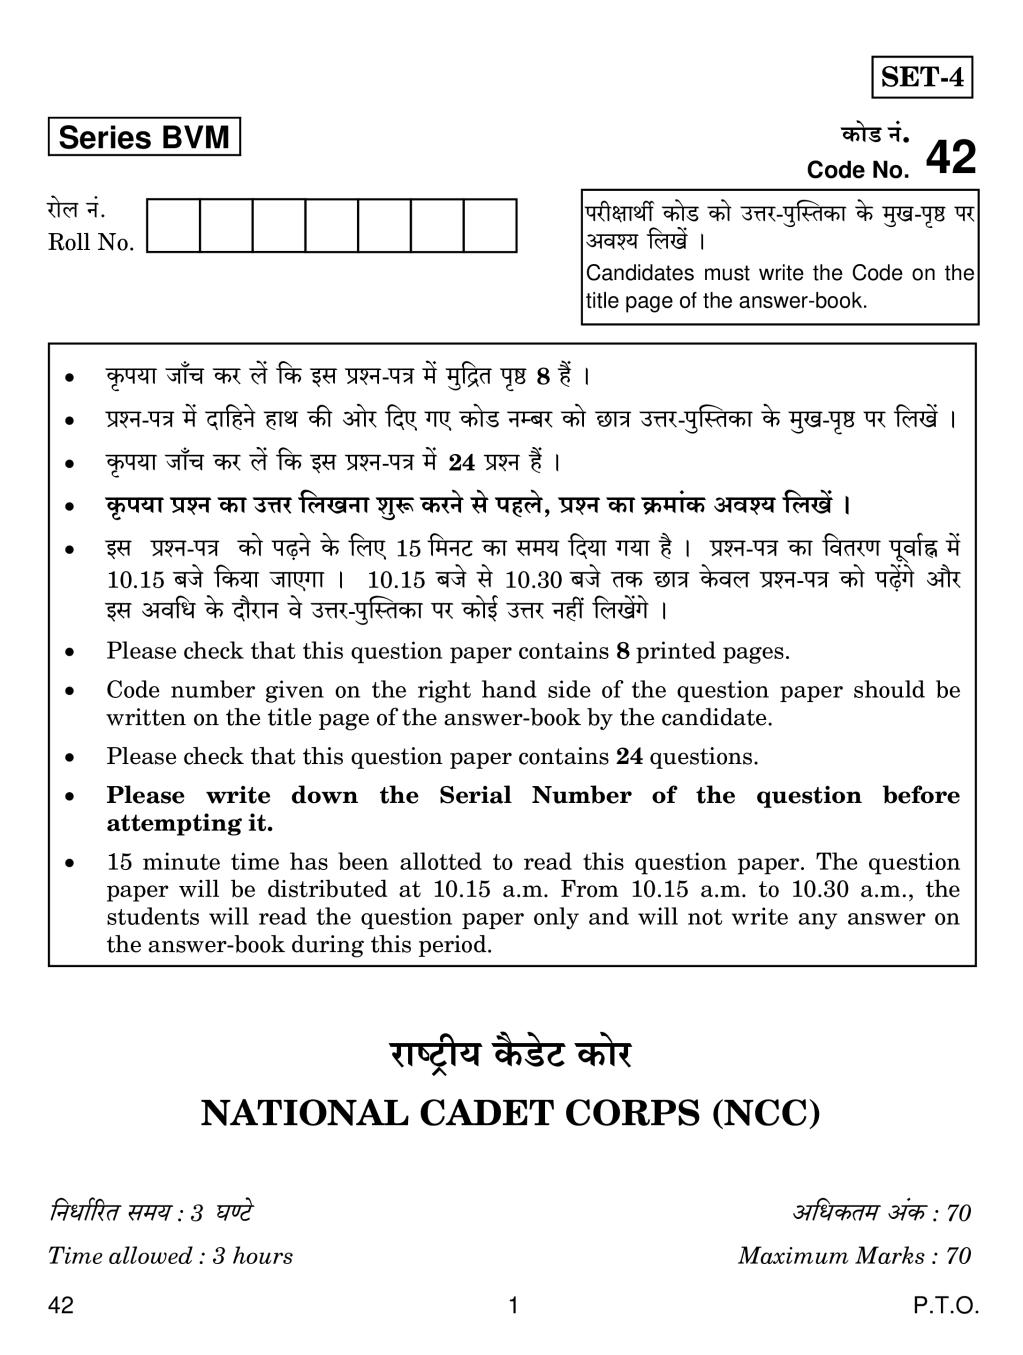 CBSE Class 12 National Cadet Corps Question Paper 2019 - Page 1